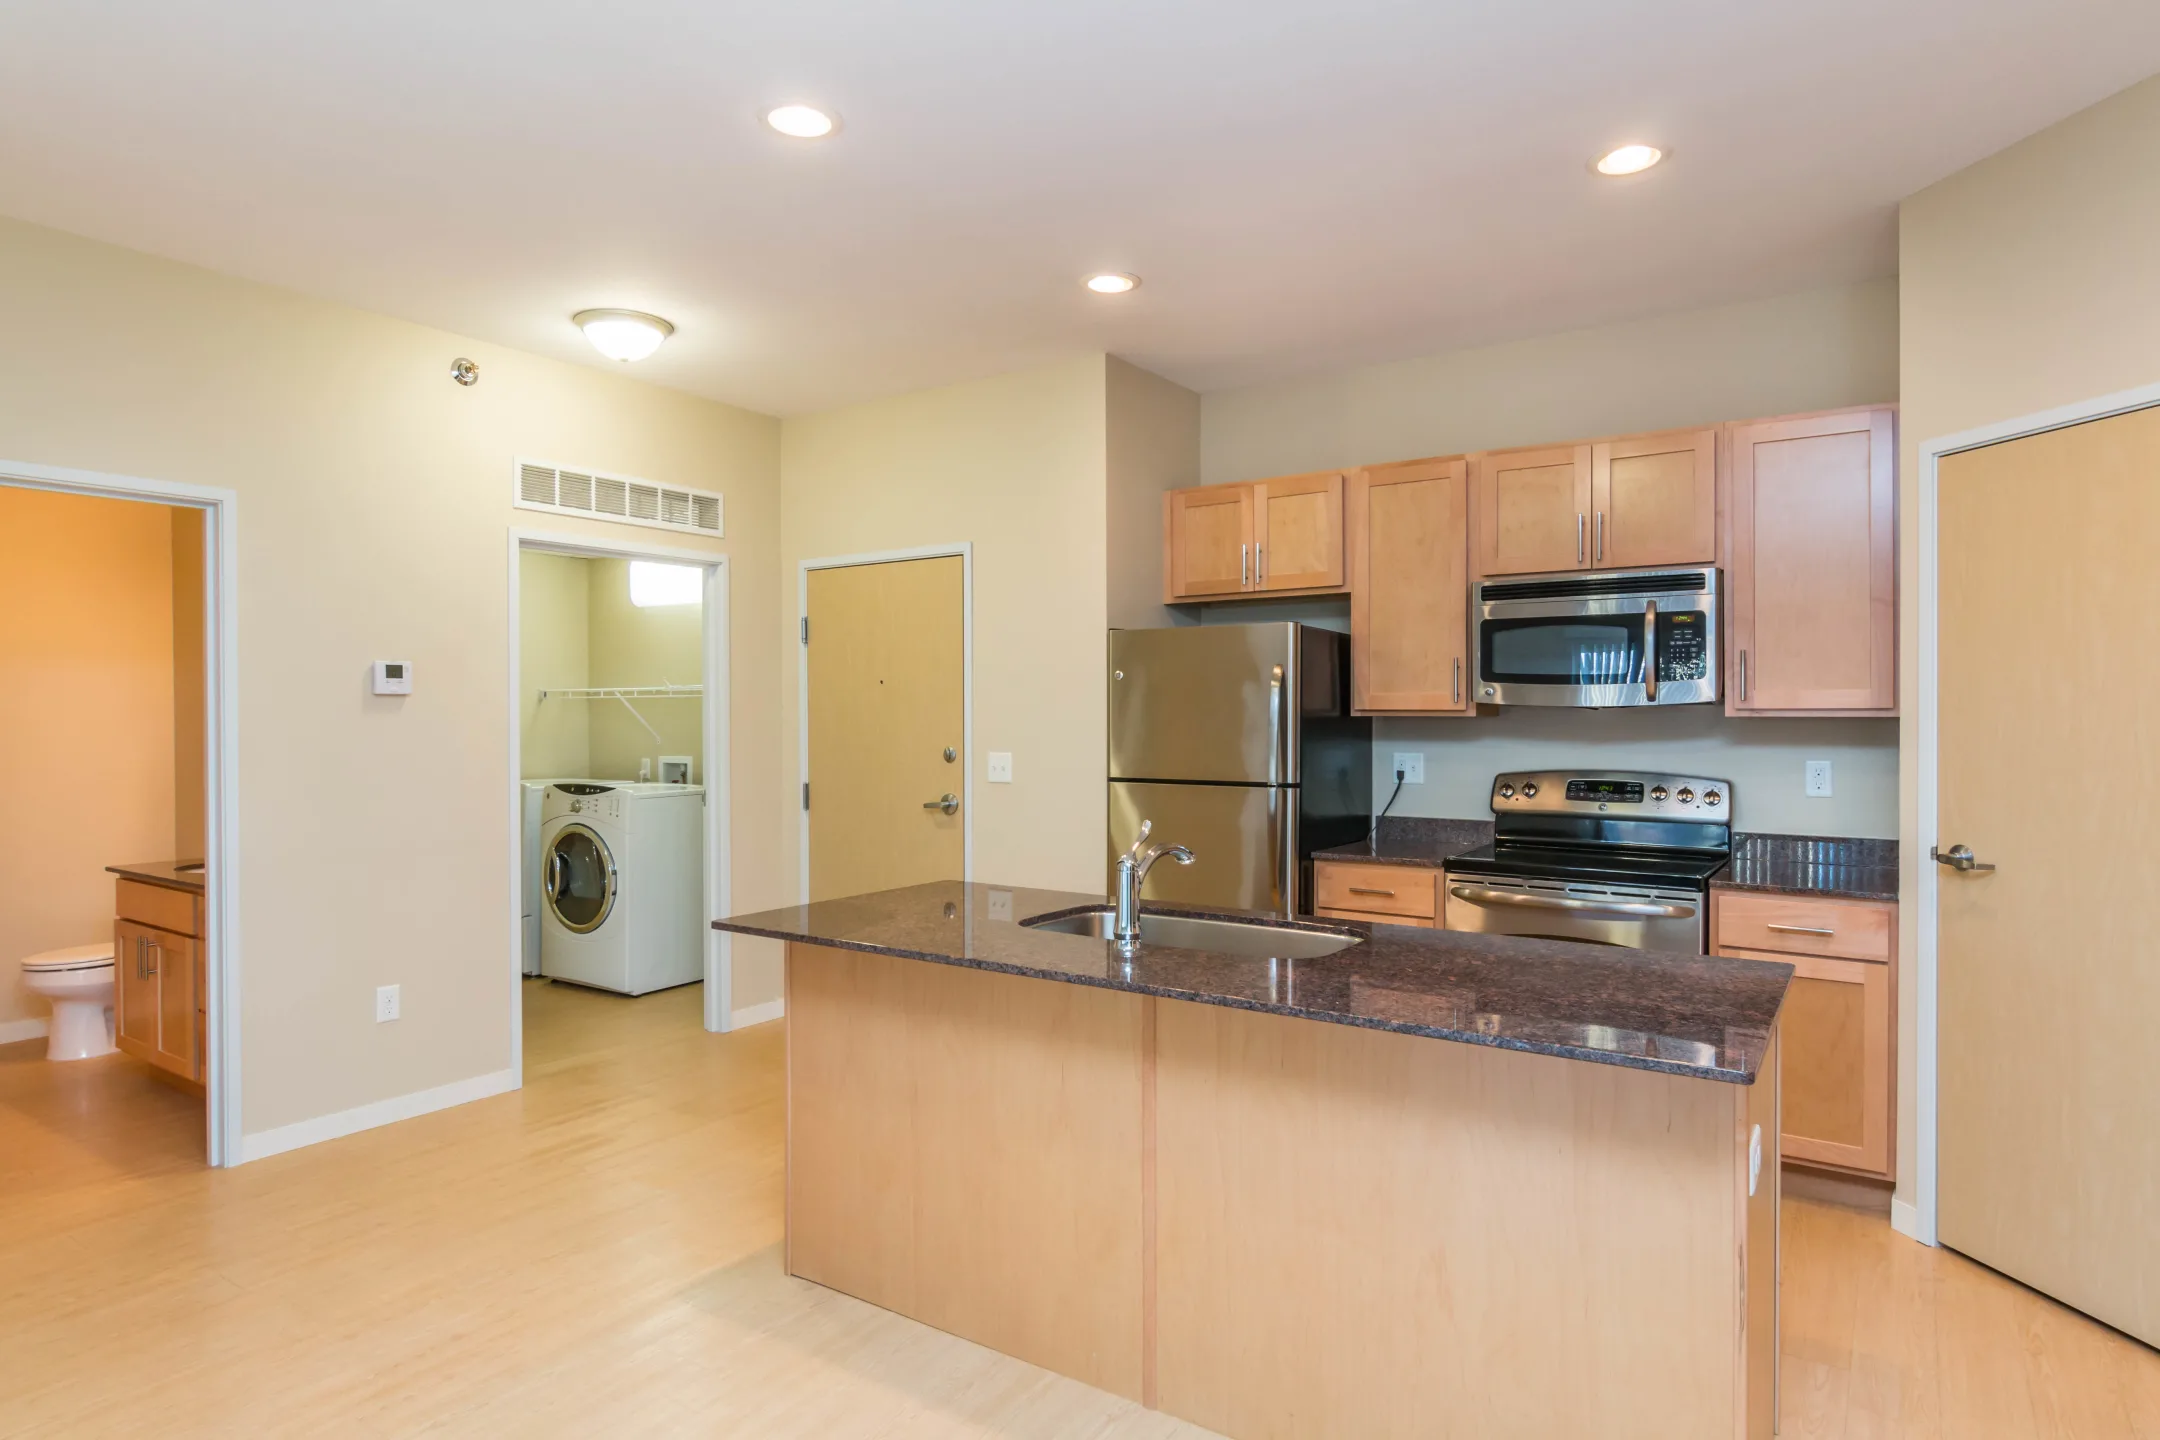 Kitchen - Mallview Apartments - Grand Forks, ND